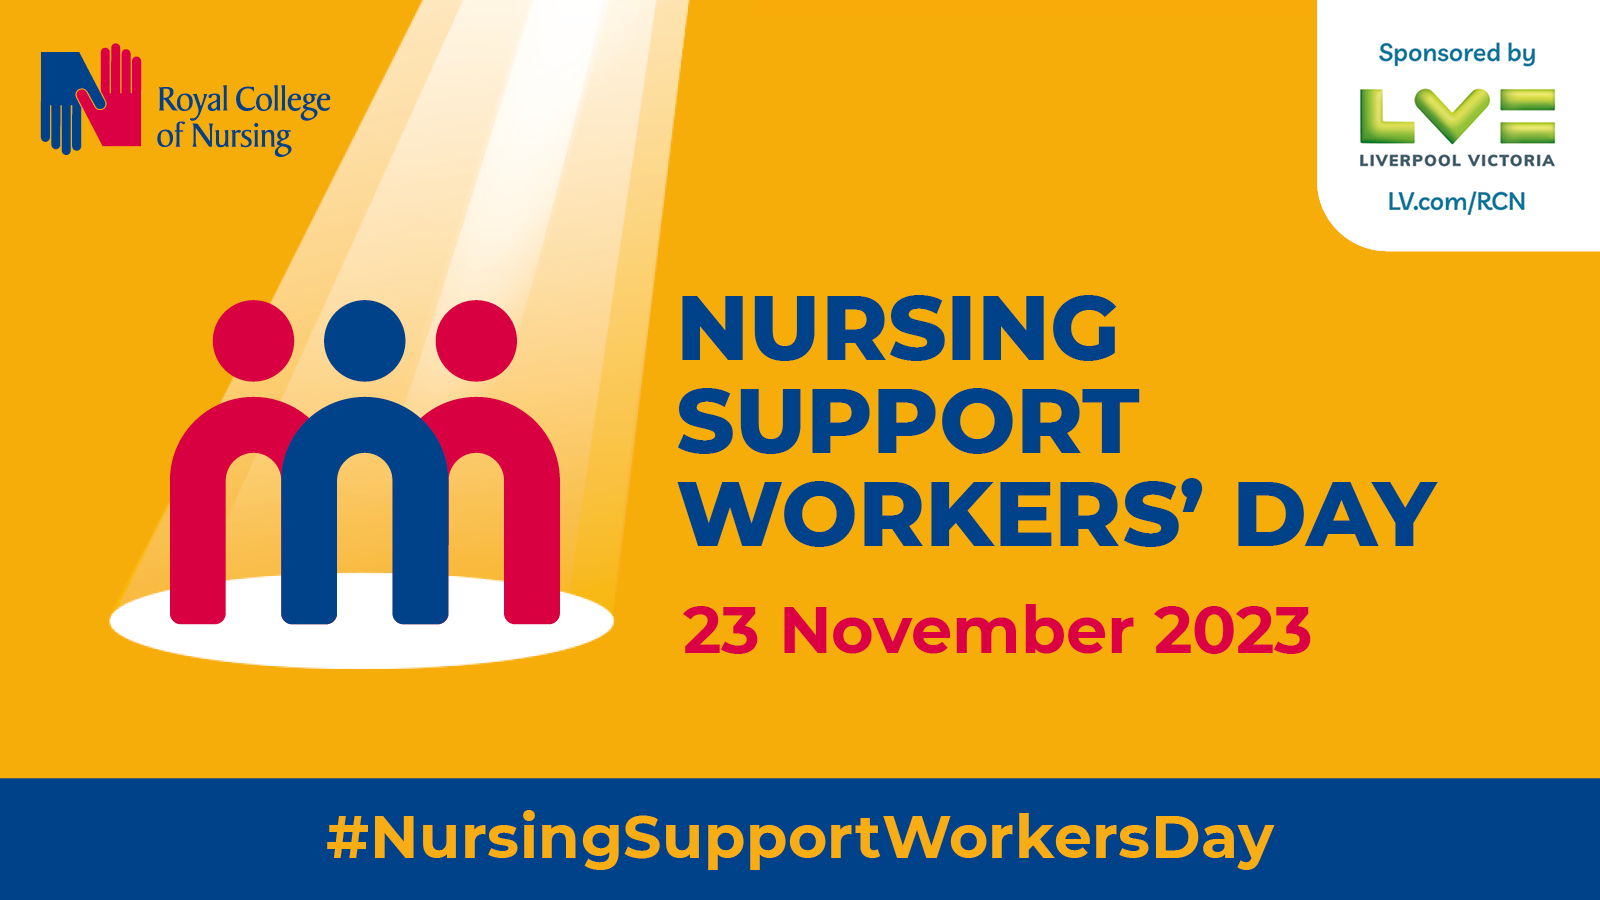 Nursing Support Workers' Day 2023